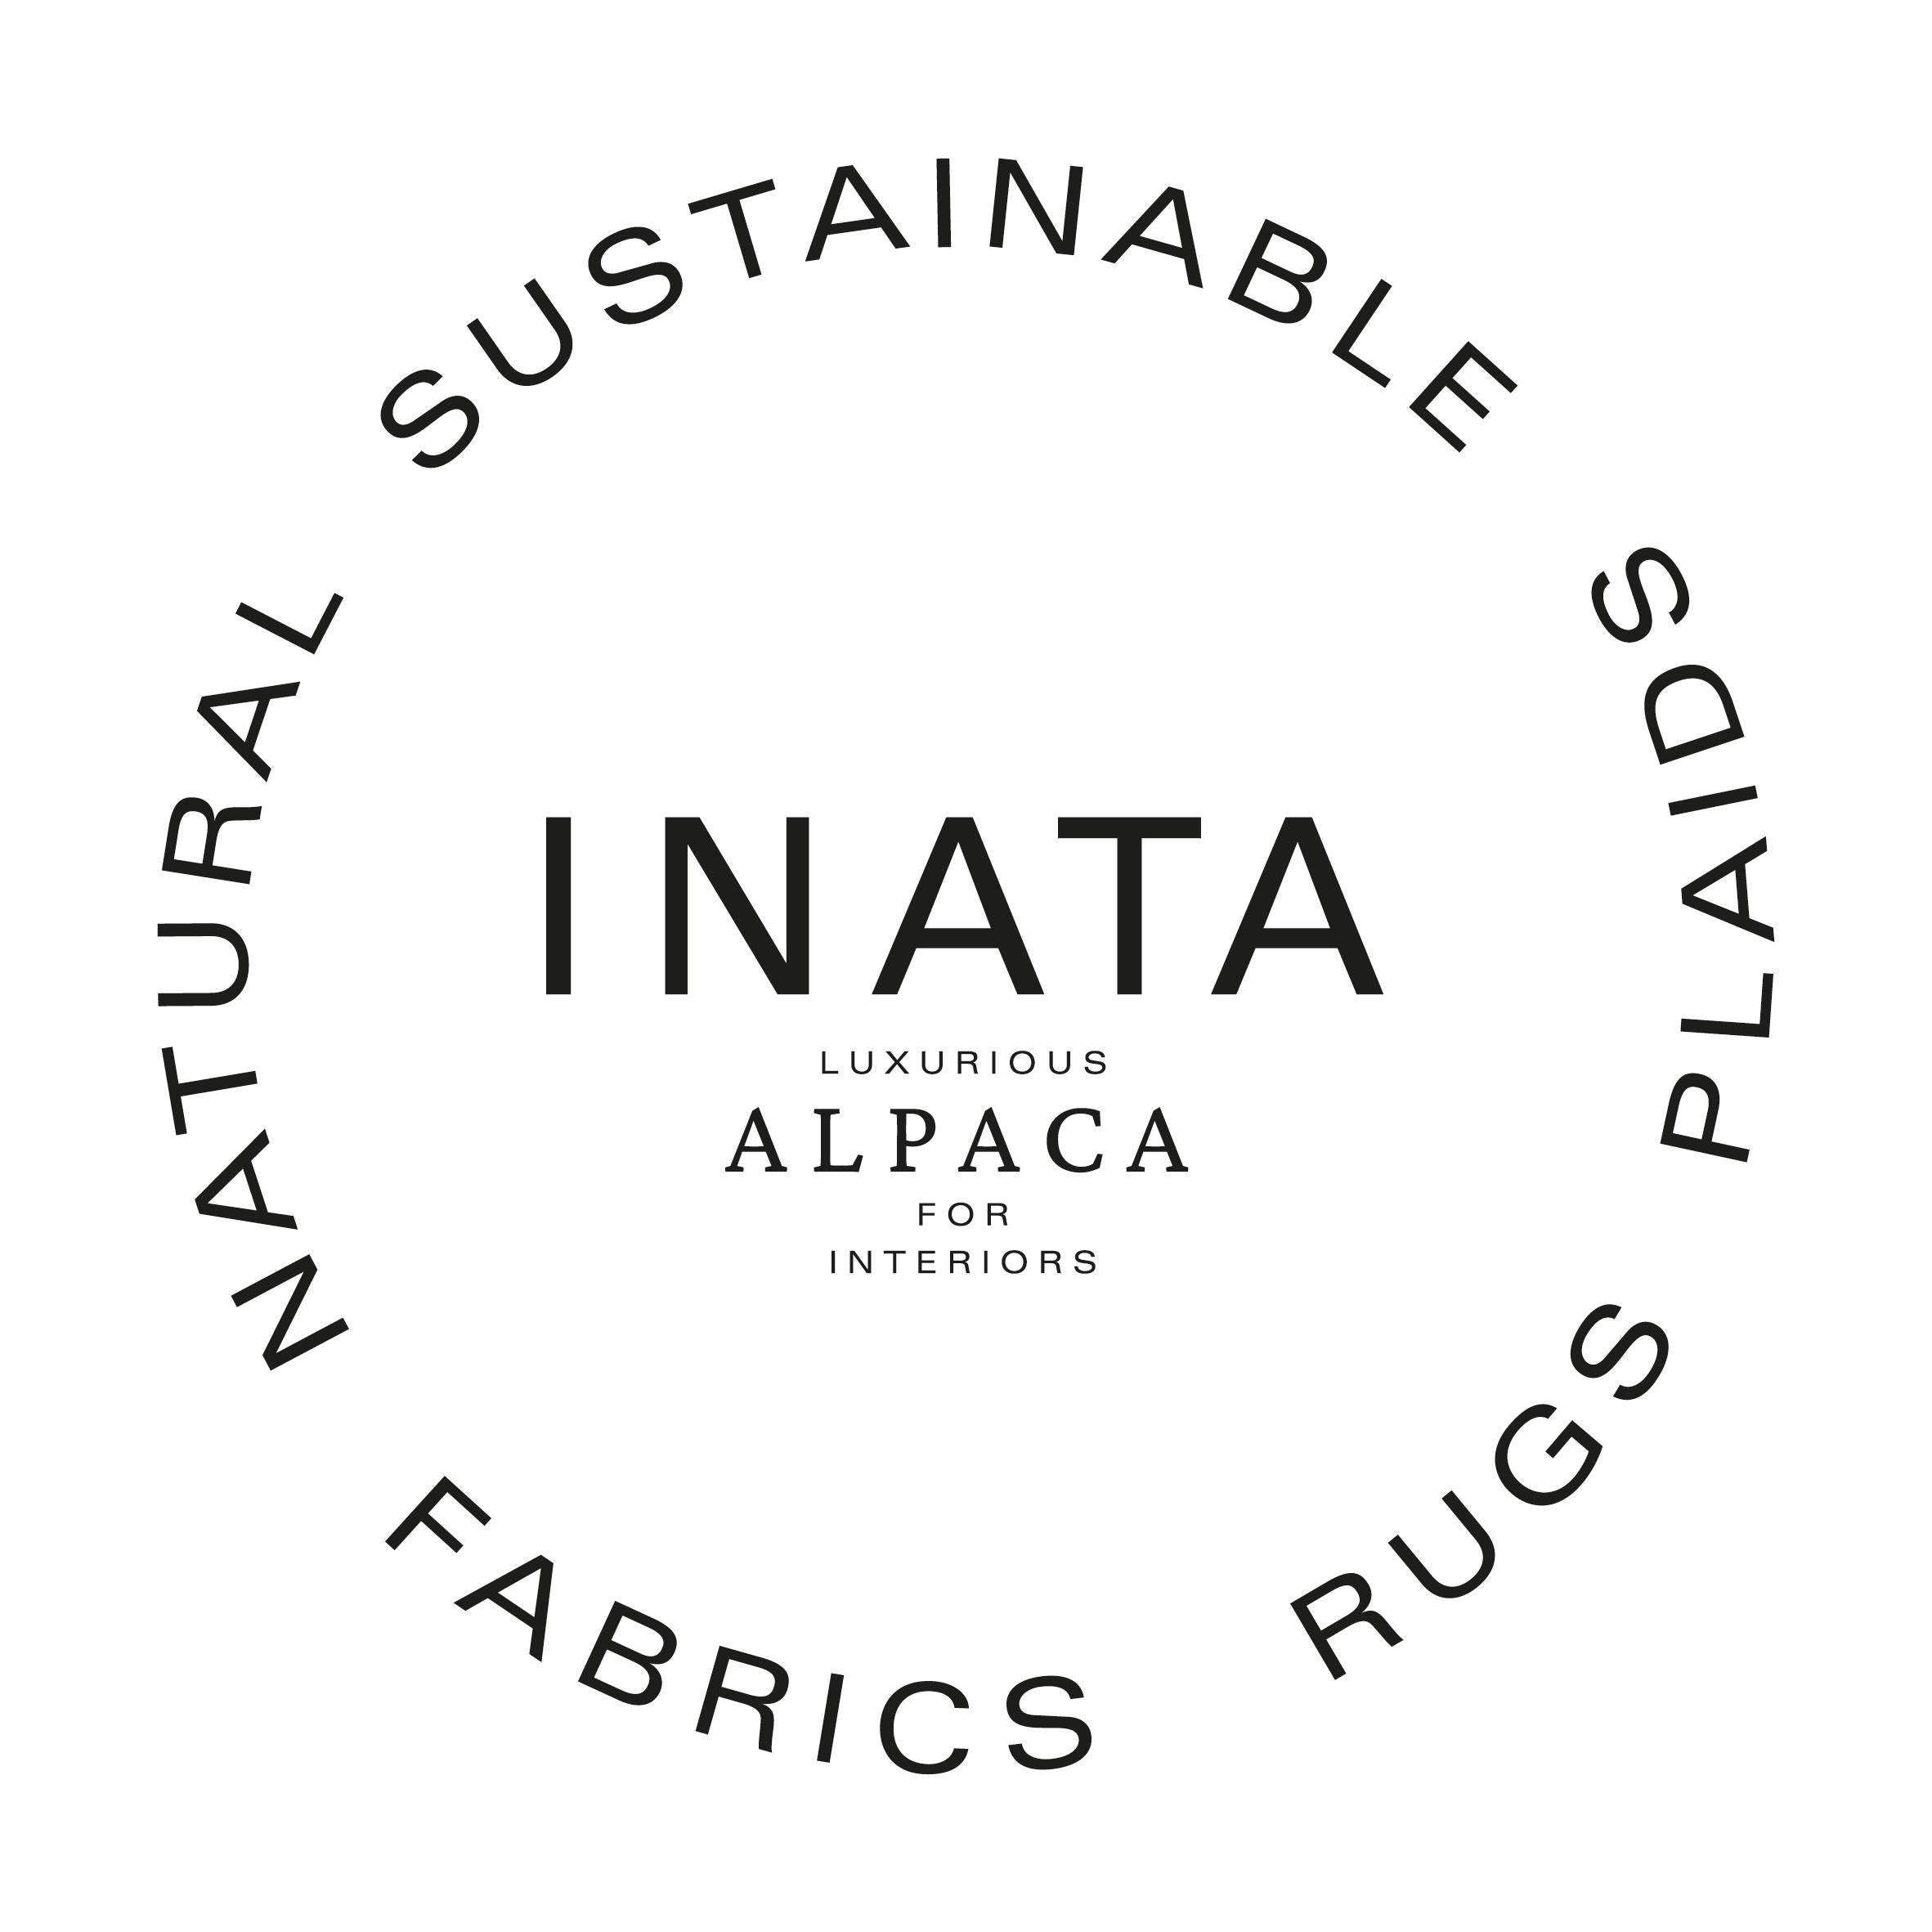 Pushing the boundaries of sustainable luxury textiles for interiors, we preserve the heritage of and empower alpaca farmers. Every step of the production is controlled by Inata to guarantee products are made with the greatest respect to the people